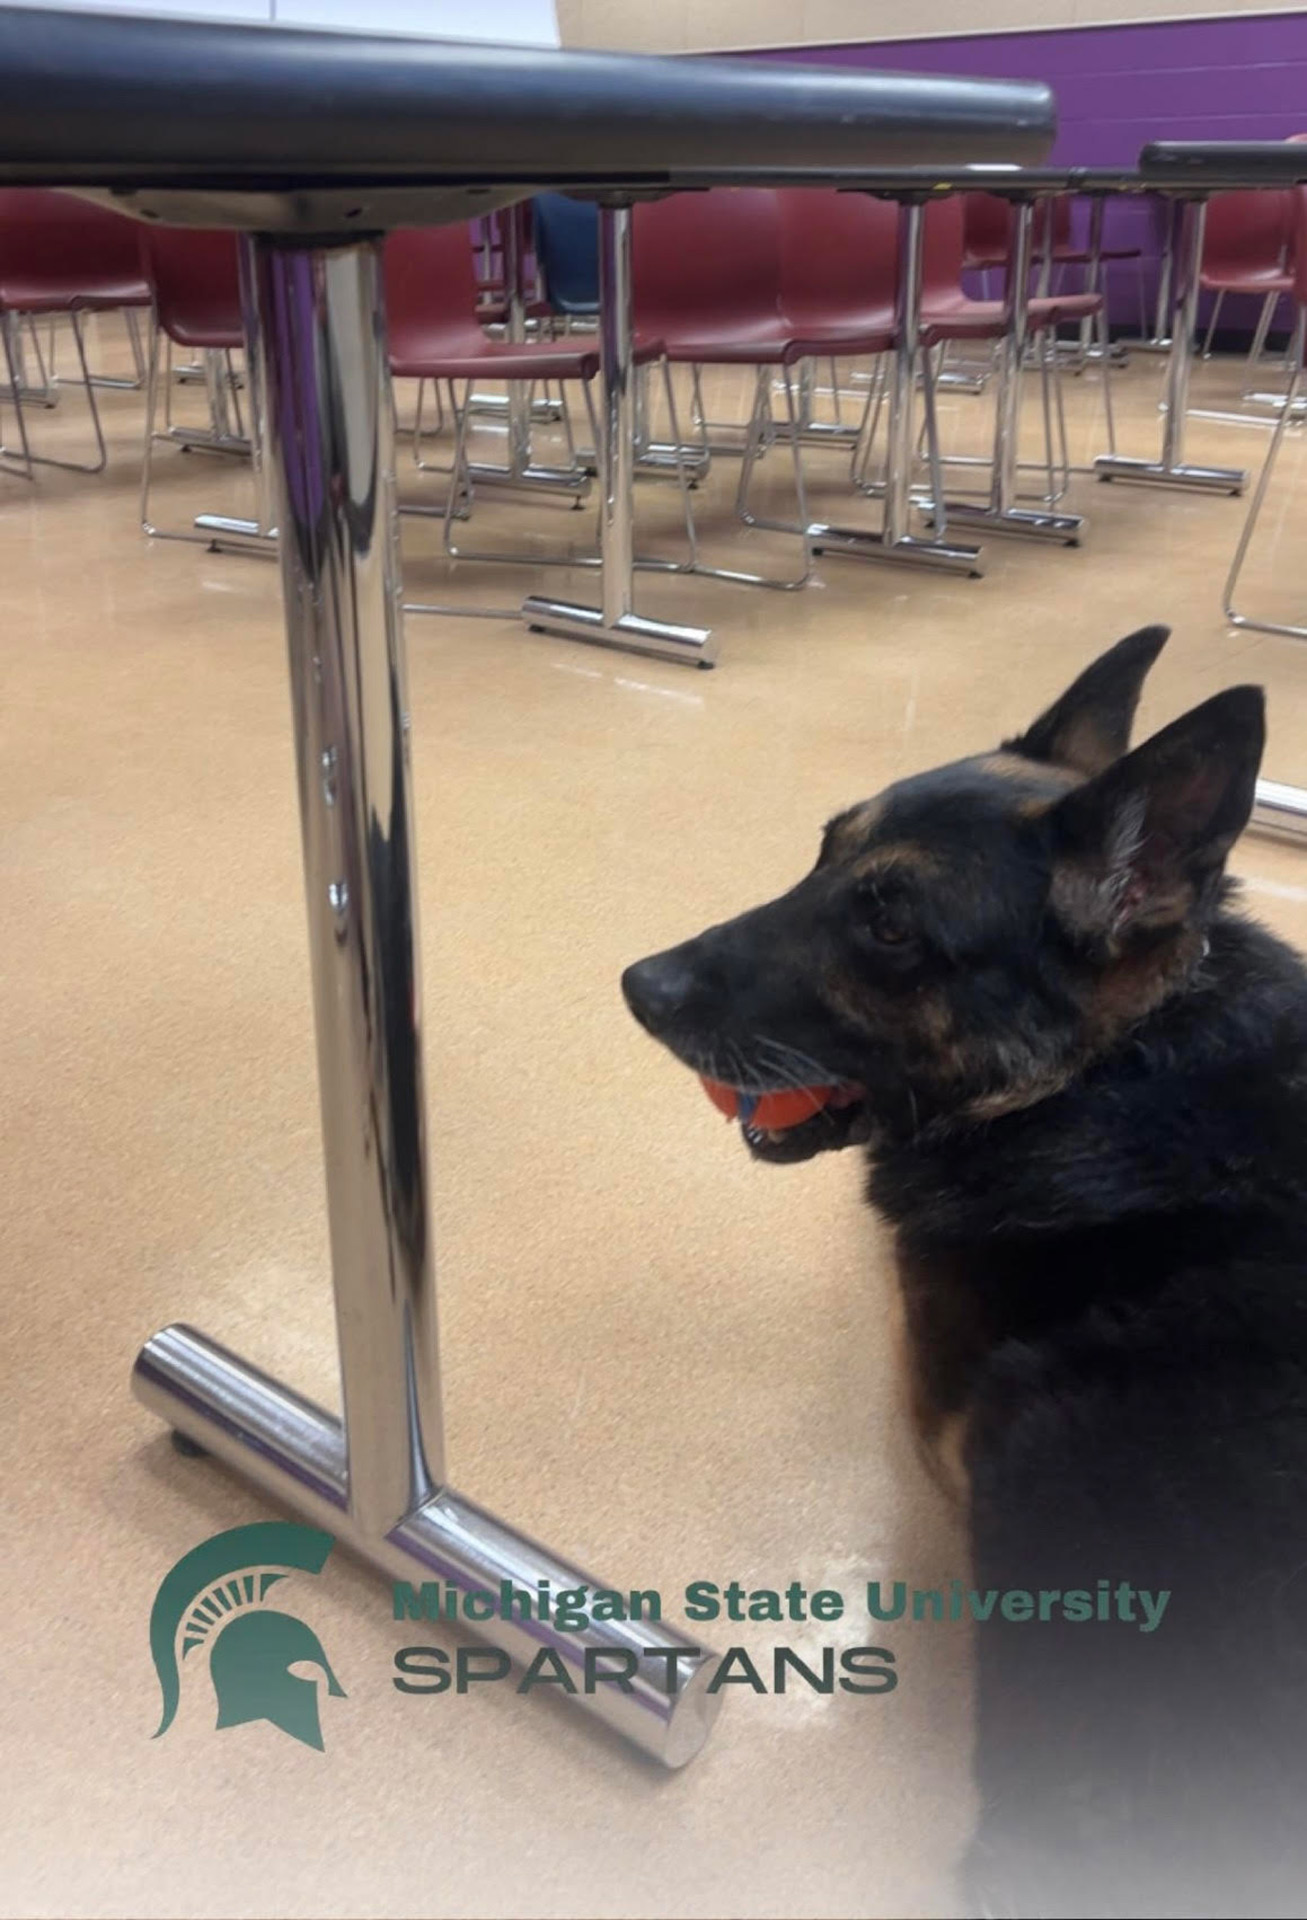 police-k-9-comforts-michigan-state-university-students-returning-to-class-after-campus-mass-shooting-2